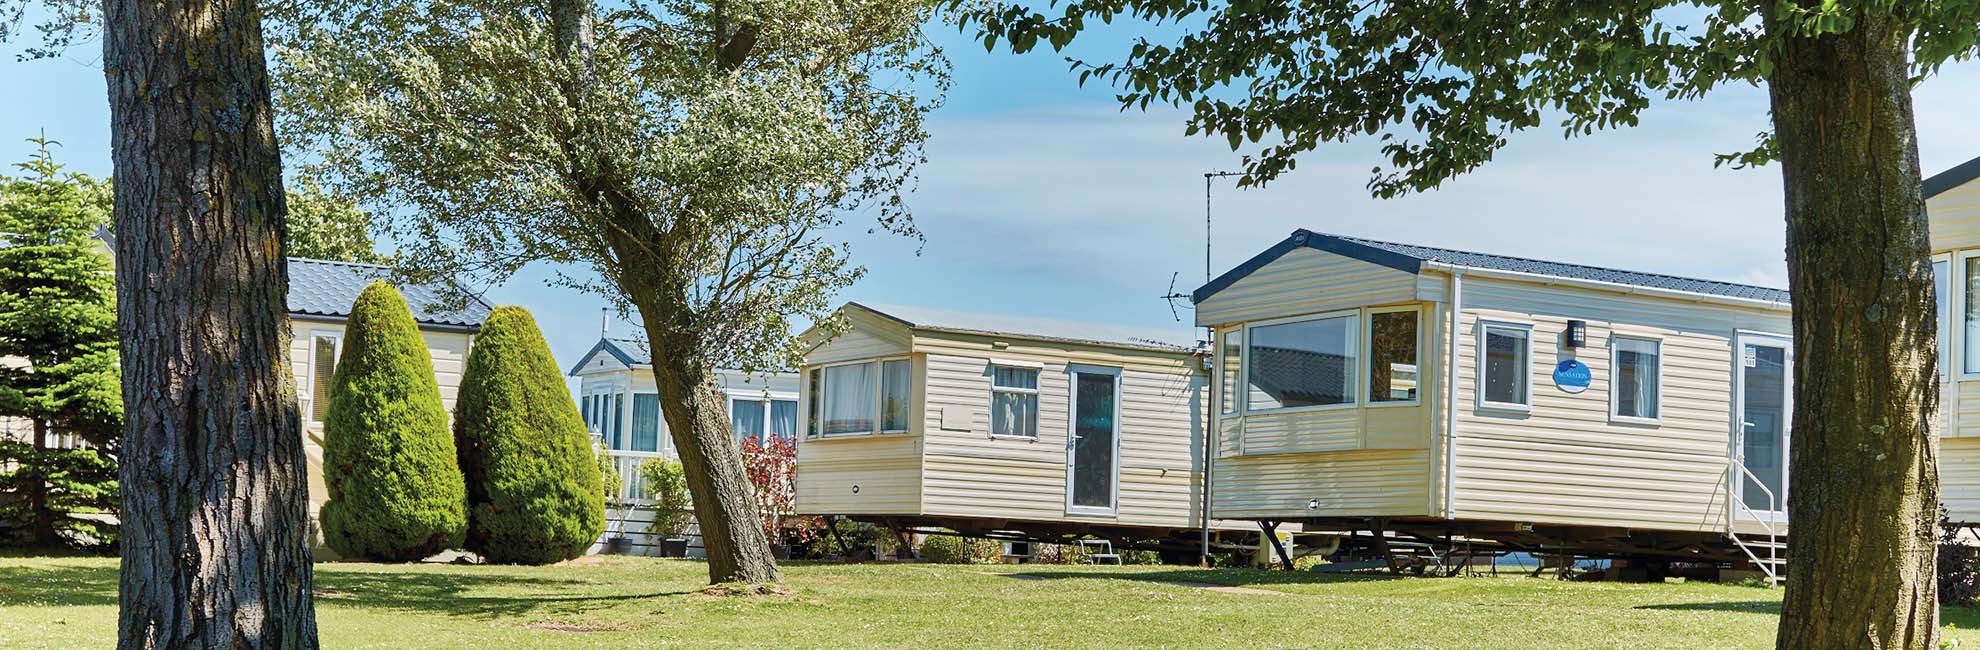 The caravans at St. Margaret's Bay Holiday Park in the sun